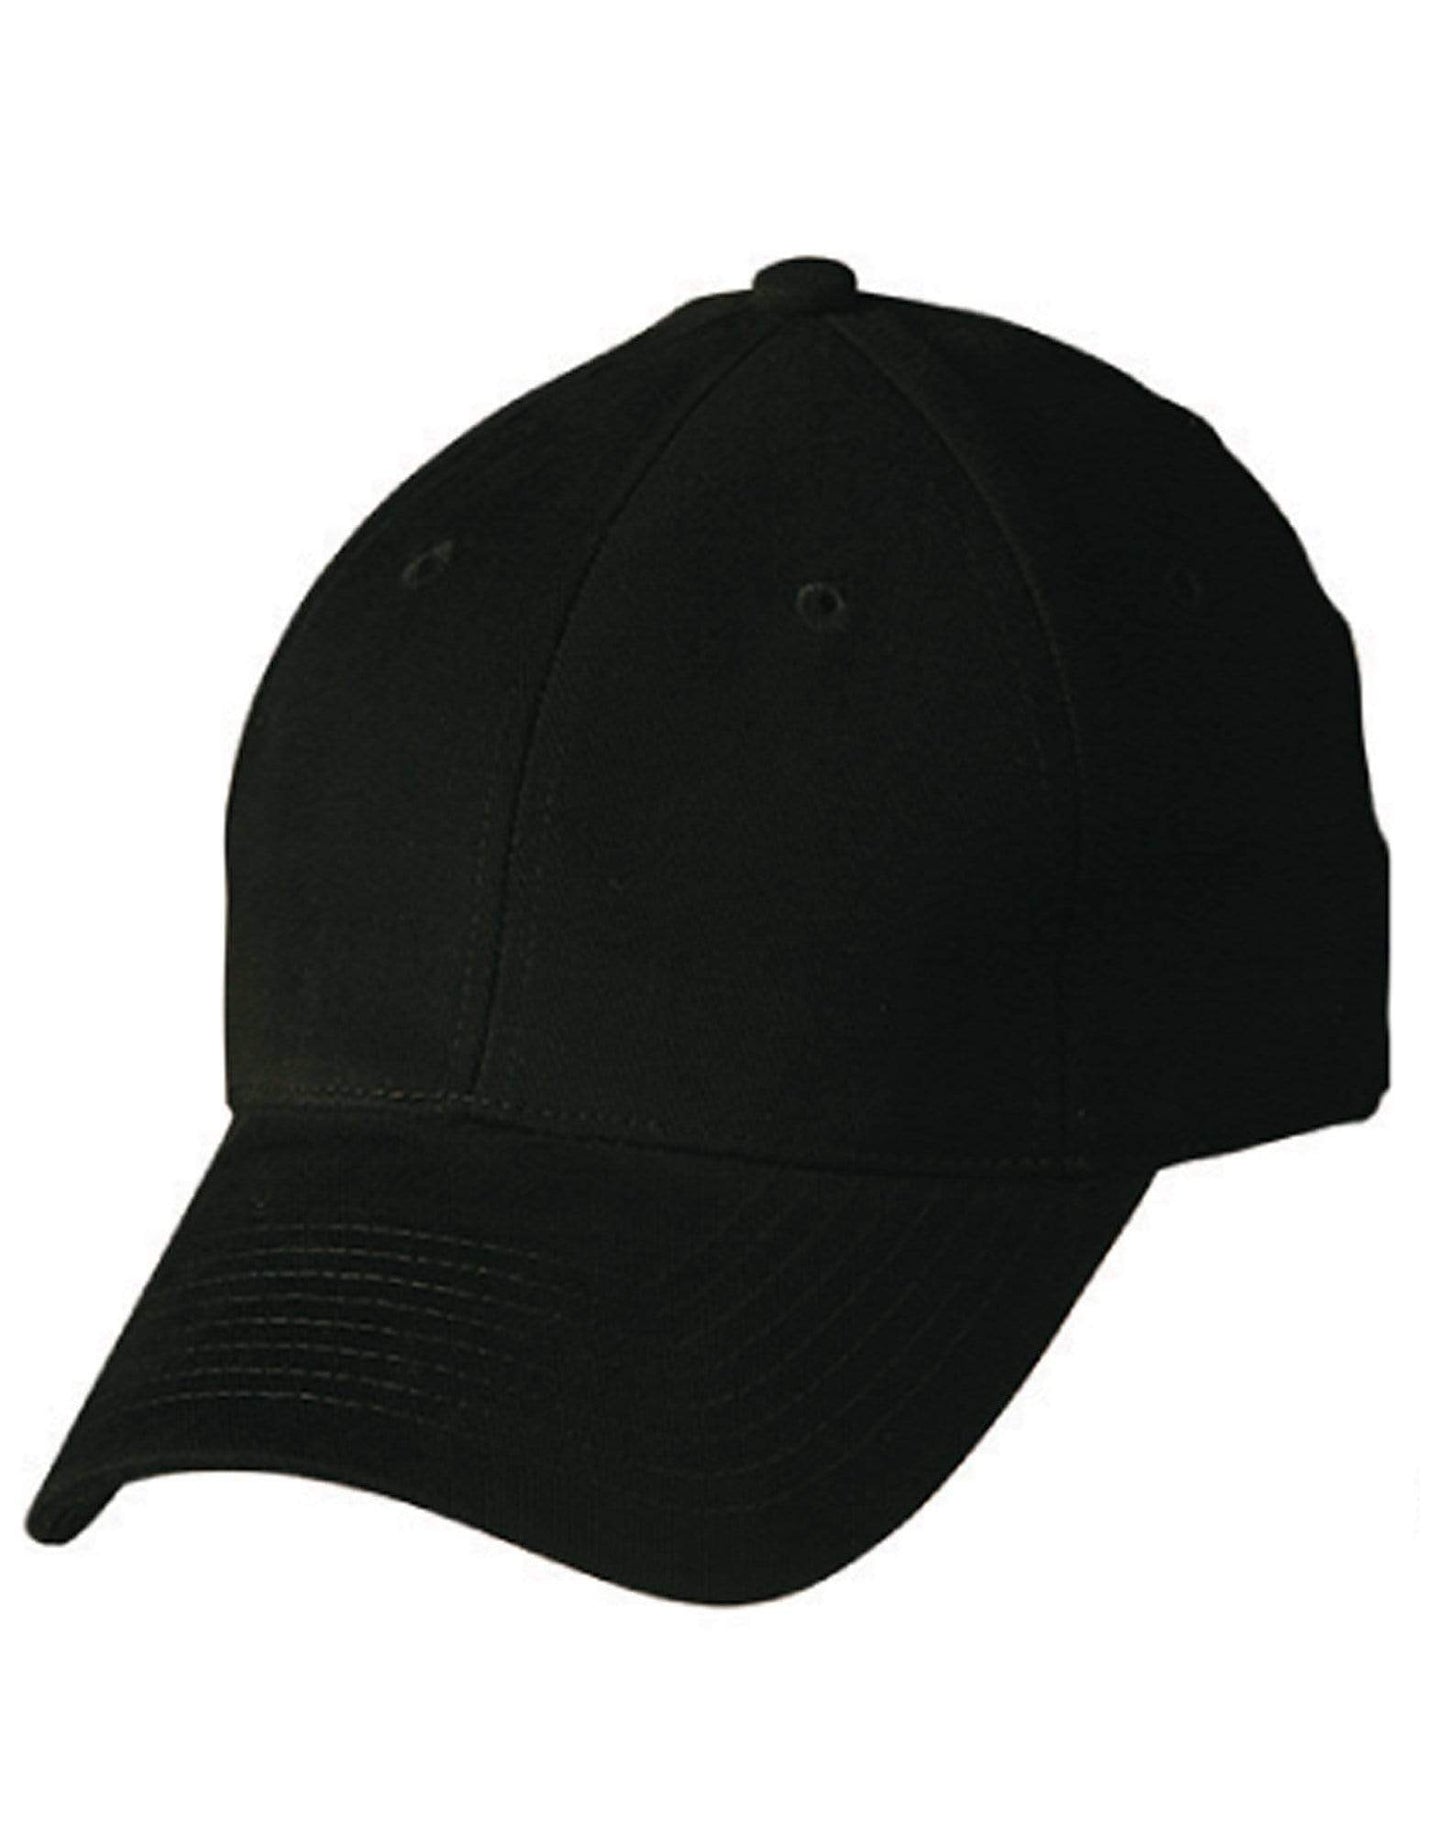 Winning Spirit Active Wear Black / One size Heavy Brushed Cotton Cap With Buckle Ch35